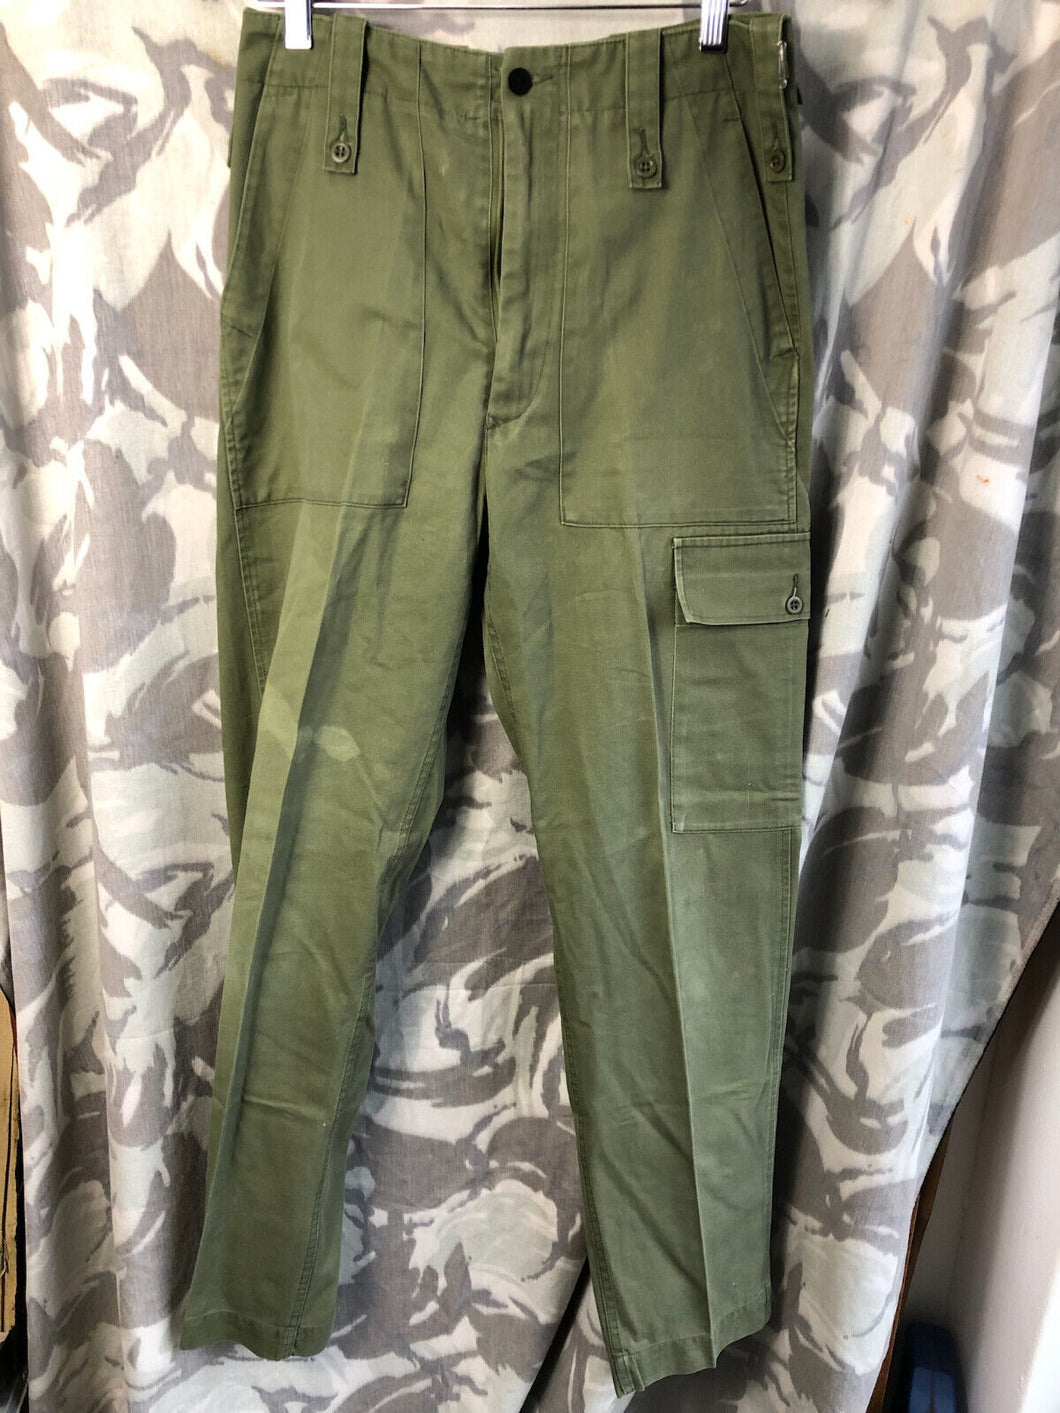 Genuine British Army OD Green Fatigue Combat Trousers - Size 85/80/96